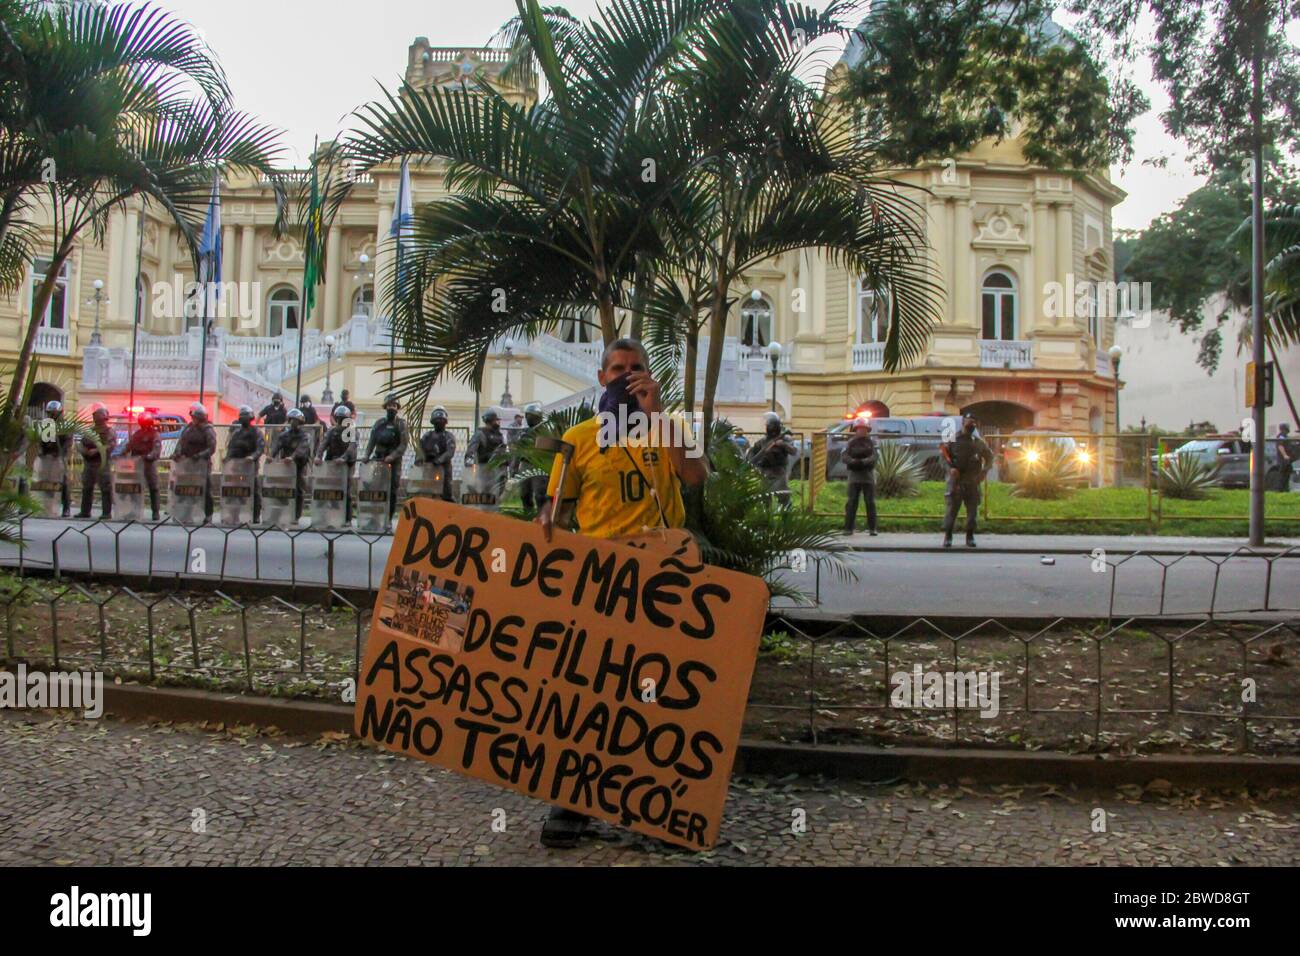 May 31, 2020, Rio De Janeiro, Rio de Janeiro, Brasil: (INT) Protest in Rio de Janeiro against Police violence. May 31, 2020, Rio de Janeiro, Brazil:Protesters carry out a peaceful act against violence and police operations in the communities of Rio de Janeiro, in front of the Guanabara Palace, headquarters of the government of Rio de Janeiro, in Laranjeiras, south of Rio, this Sunday. Many took signs and banners referring to the deaths of black people in the city, in the wake of demonstrations around the world after the death of American George Floyd, 46-year-old black man who was asphyxiated Stock Photo